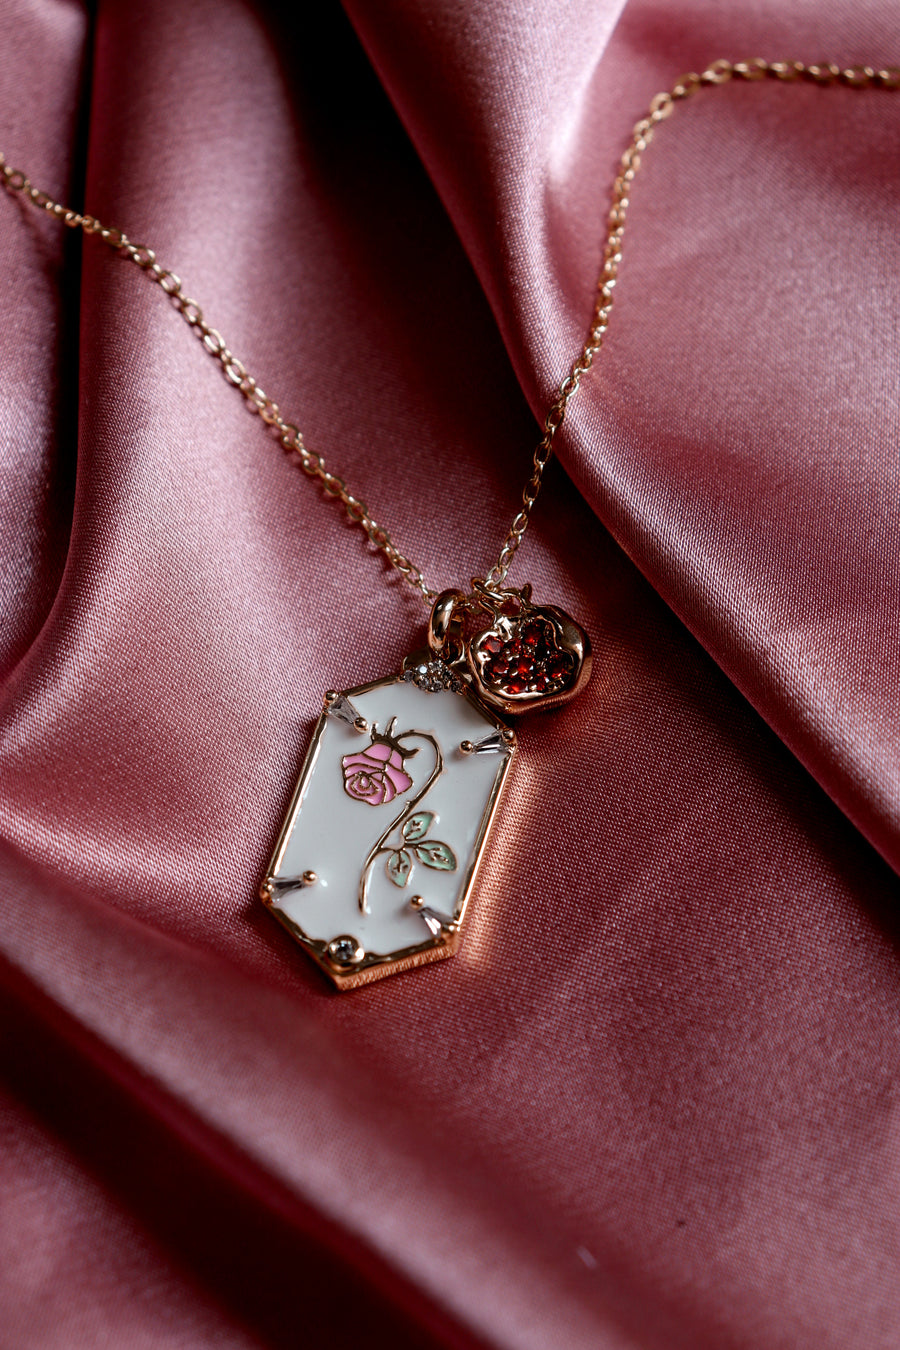 Persephone's charm | fallen rose necklace